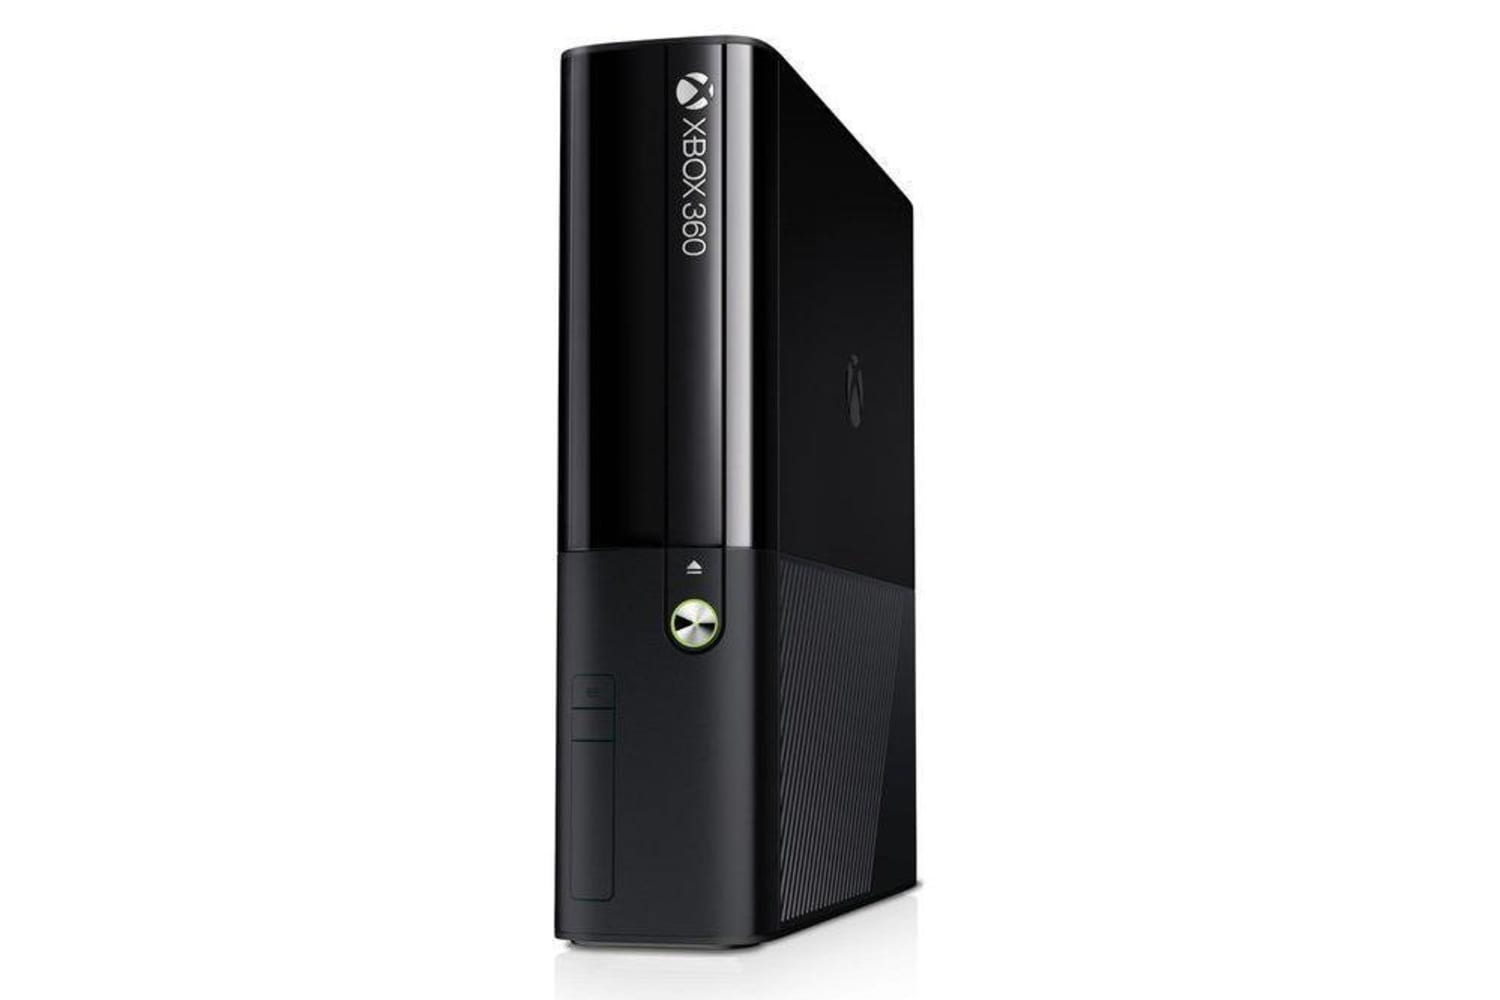 xbox 360 game system